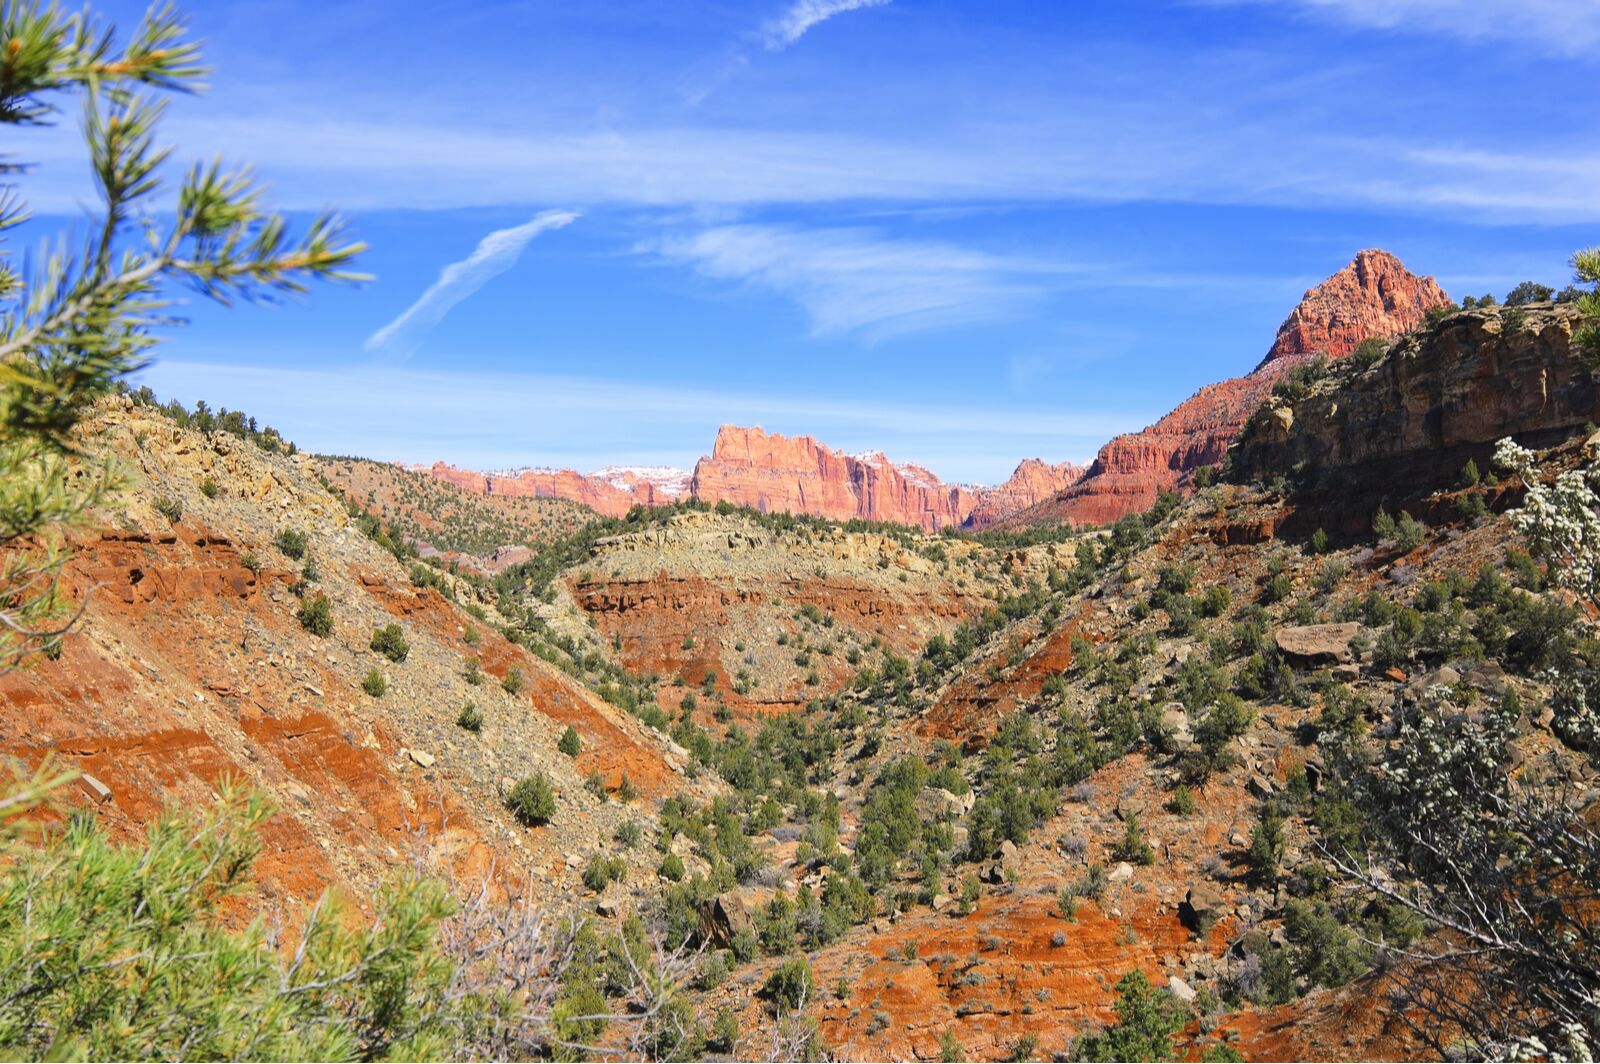 Coalpits is one of the least crowded zion national park hiking trails